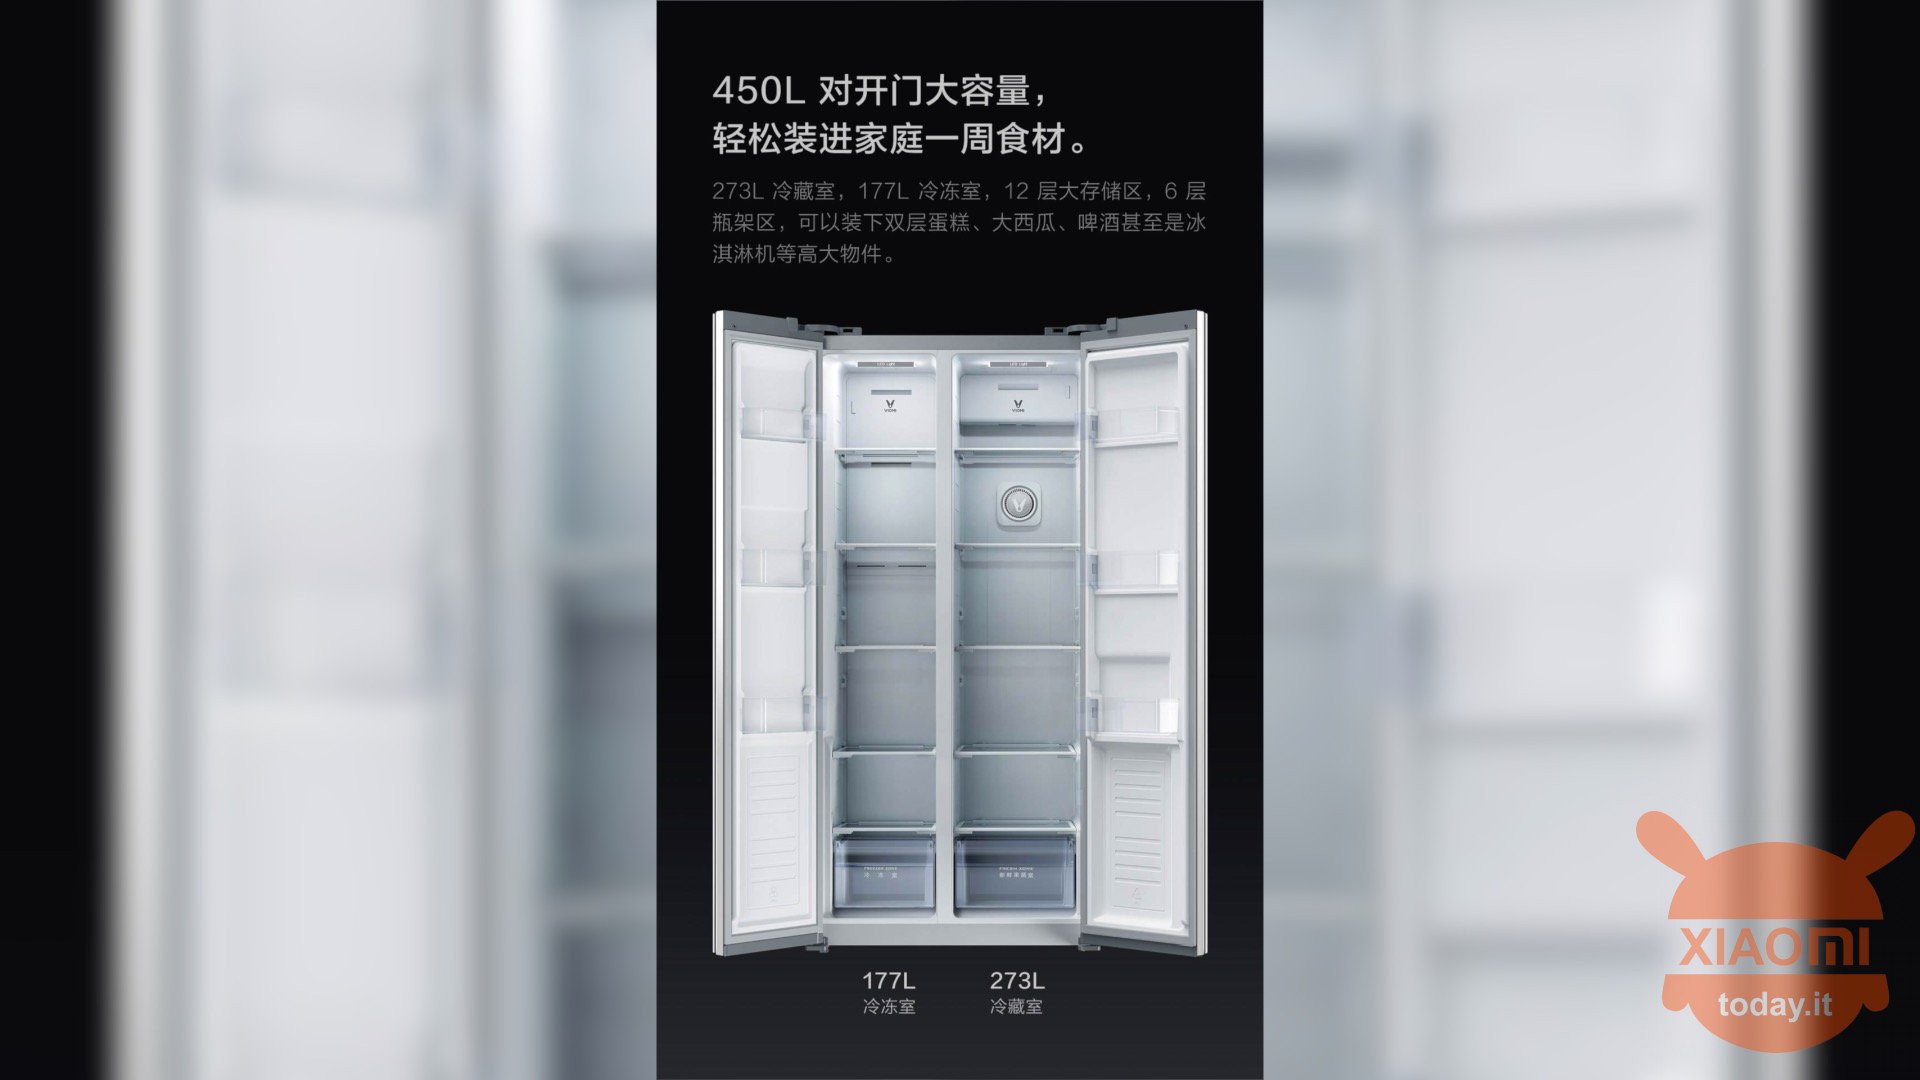 Prominent Conceit juice Viomi presents a new smart refrigerator with a 21-inch display